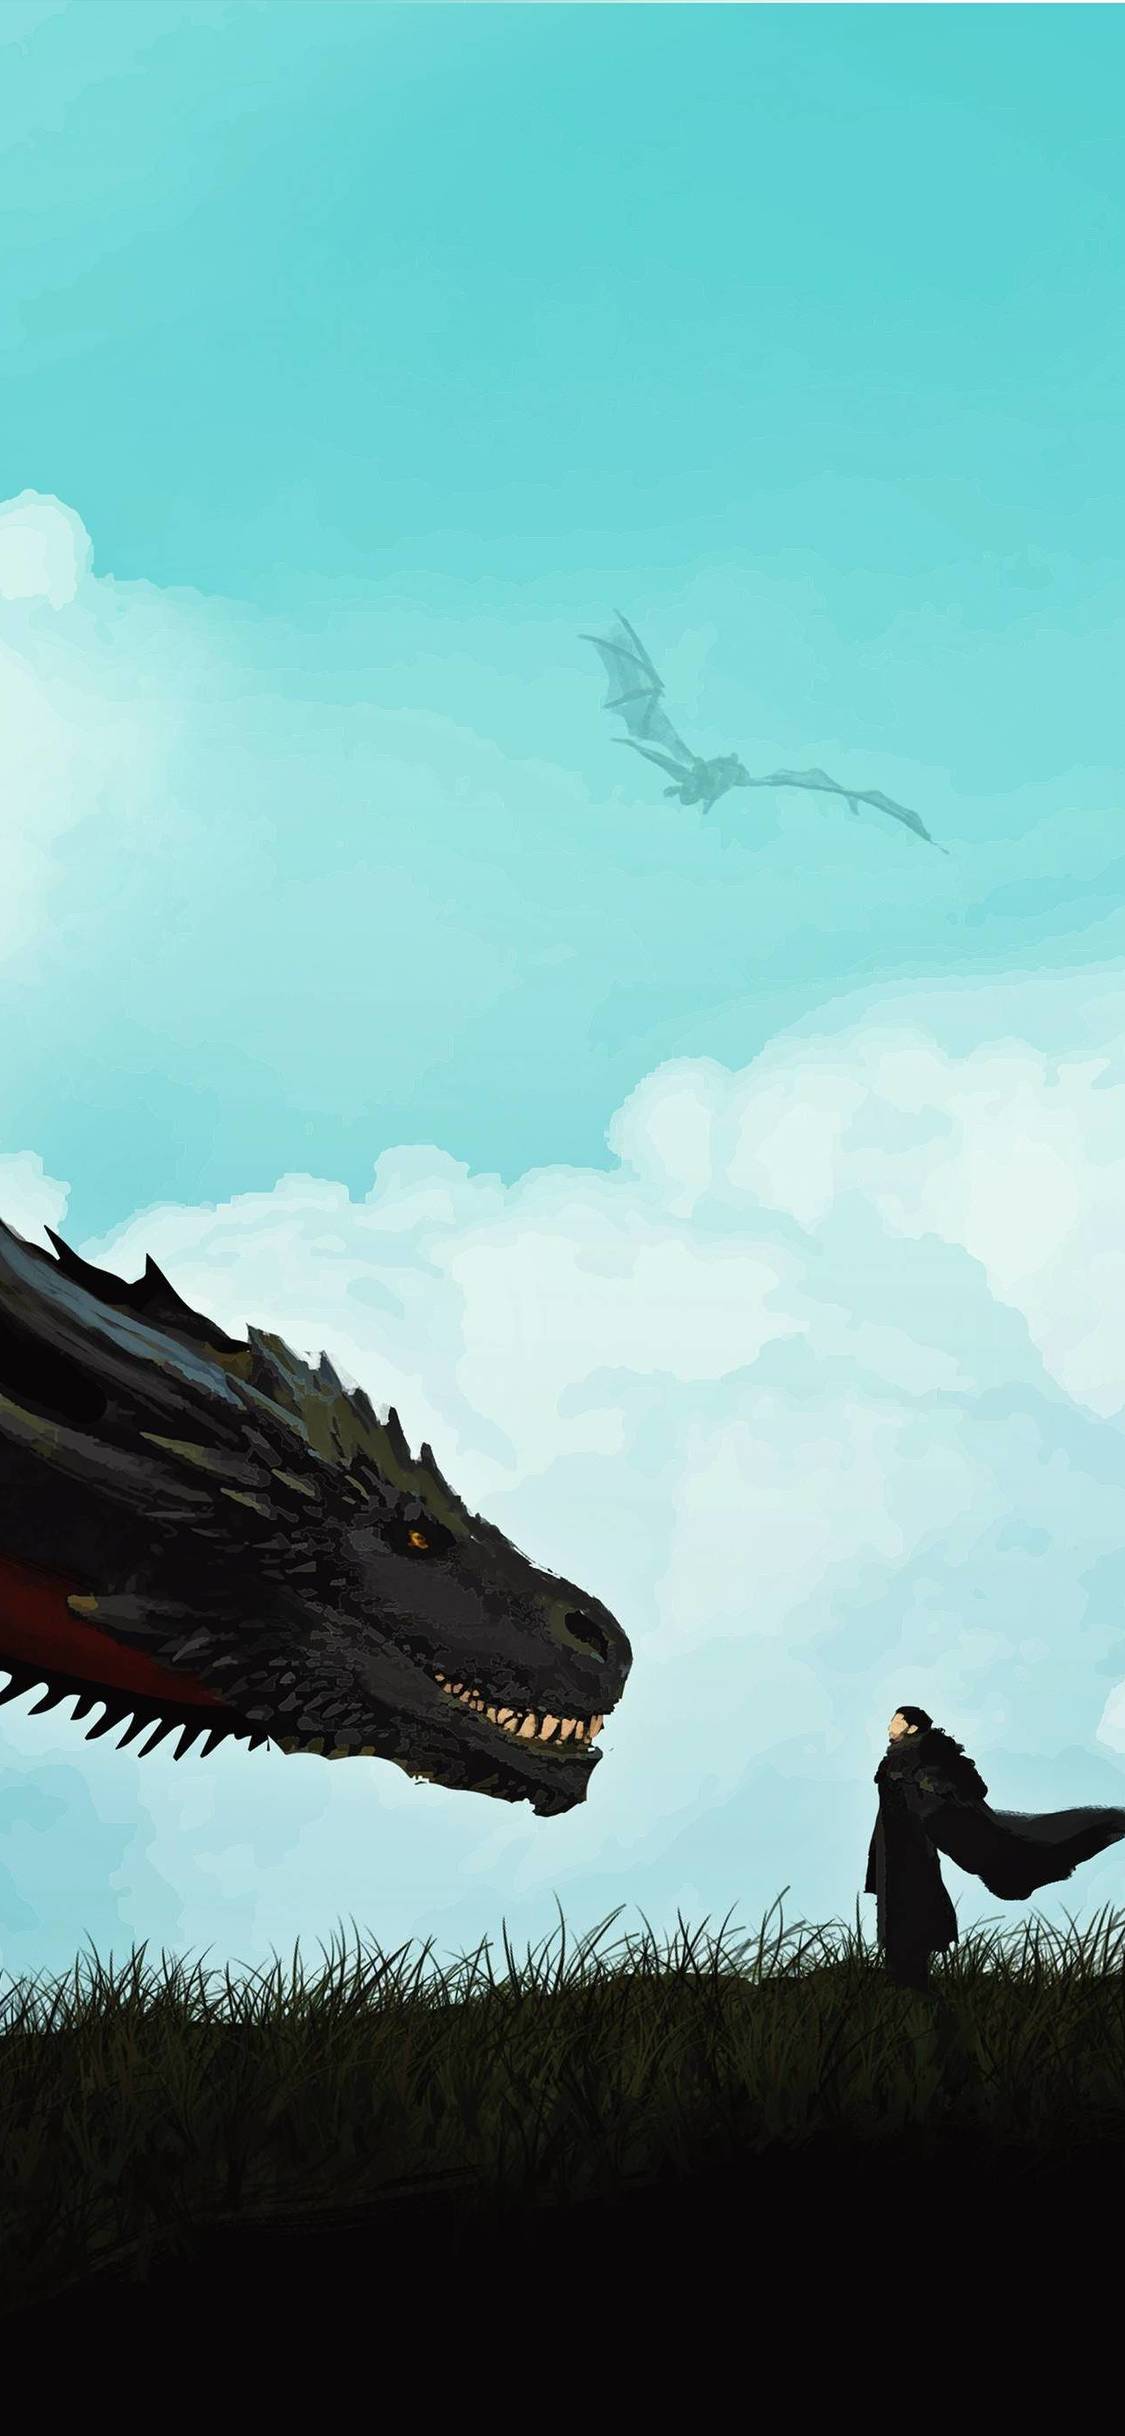 Best Game of Thrones wallpapers for iPhone